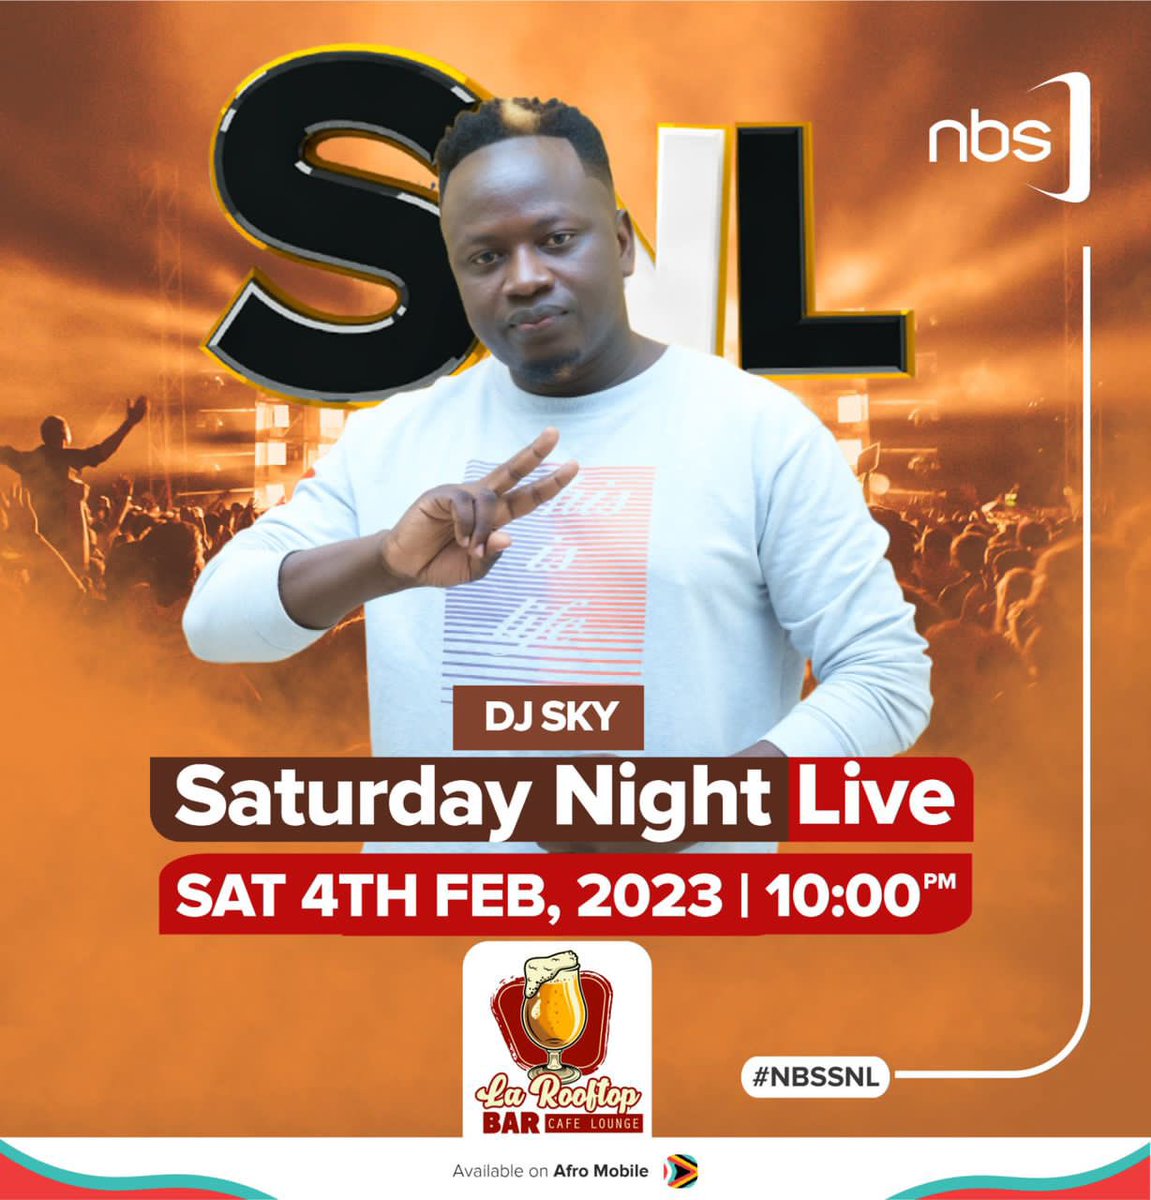 Tomorrow we are at @larooftoplounge mbarara to make our first February weekend a memorable one with an #NBSSNL edition.
Tweshangyeyo 🌚🎉